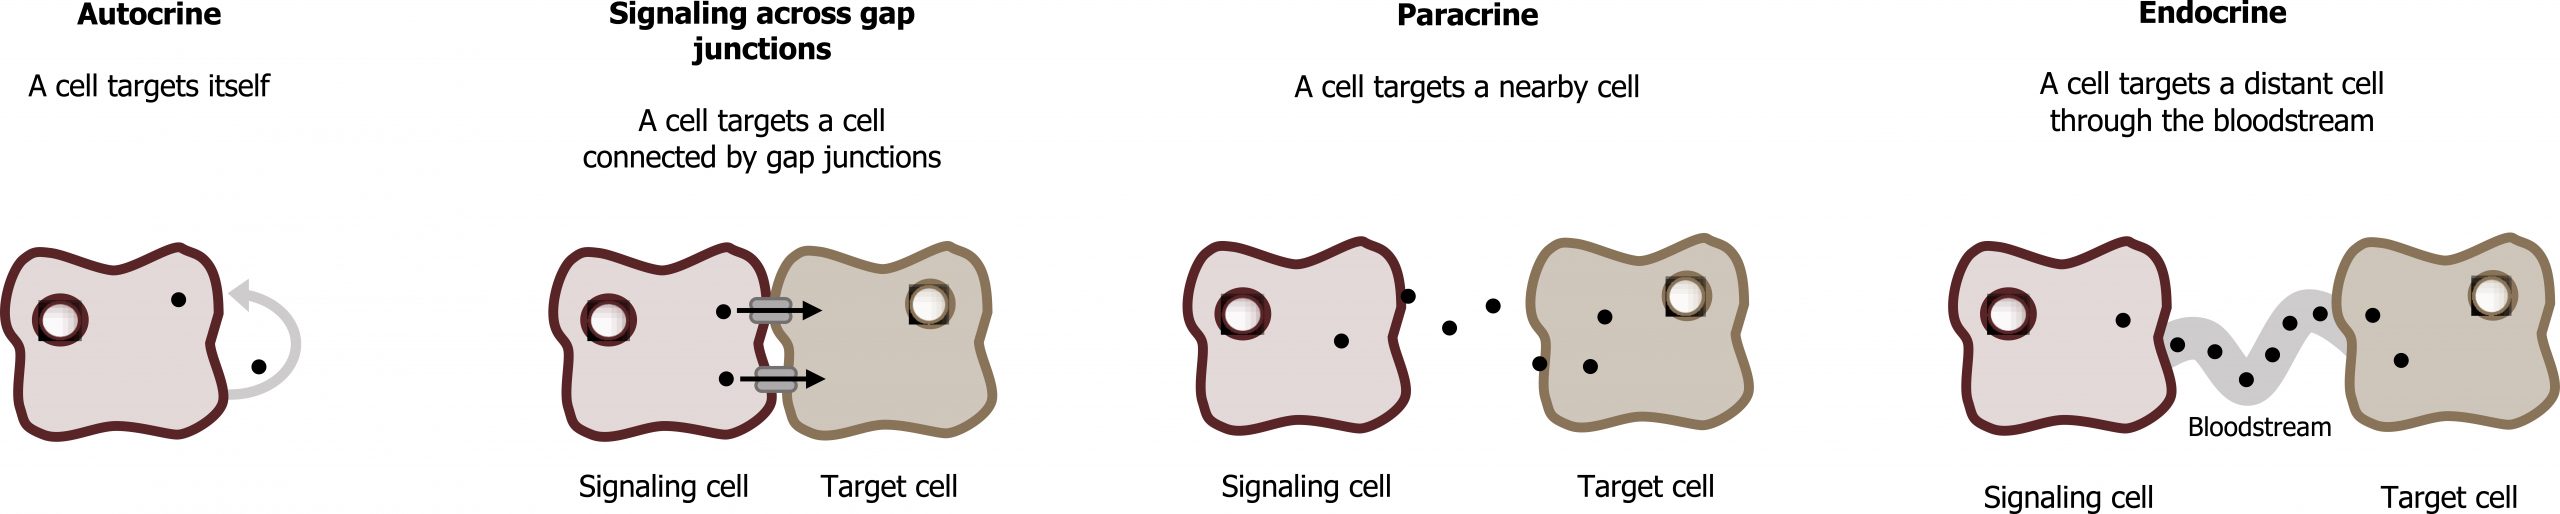 Autorcine: A cell targets itself. Signaling across gap junctions: A cell targets a cell connected by gap junctions. Paracrine: A cell targets a nearby cell. Endocrine: A cell targets a distant cell through the bloodstream.